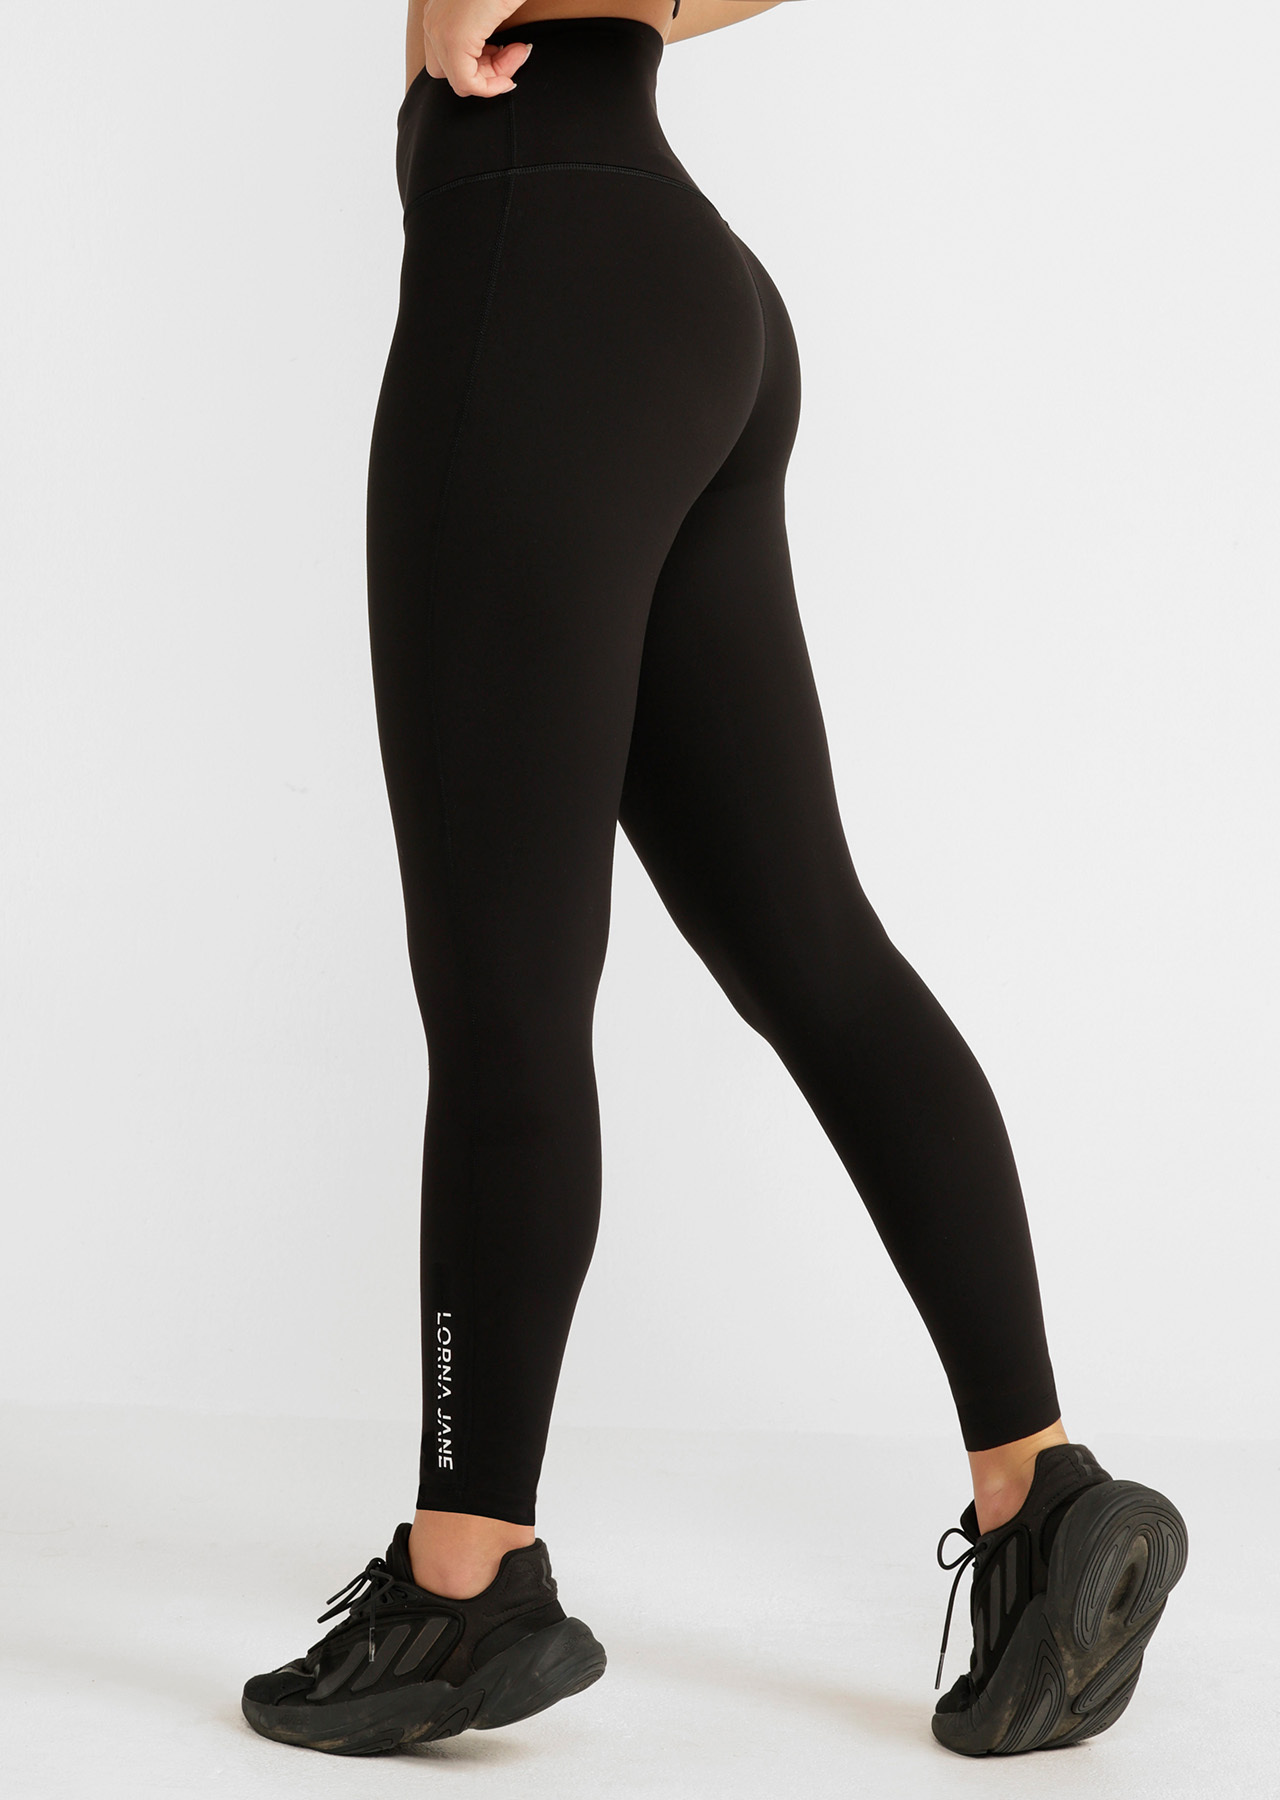 Choose your activewear with Lorna Jane - En Route